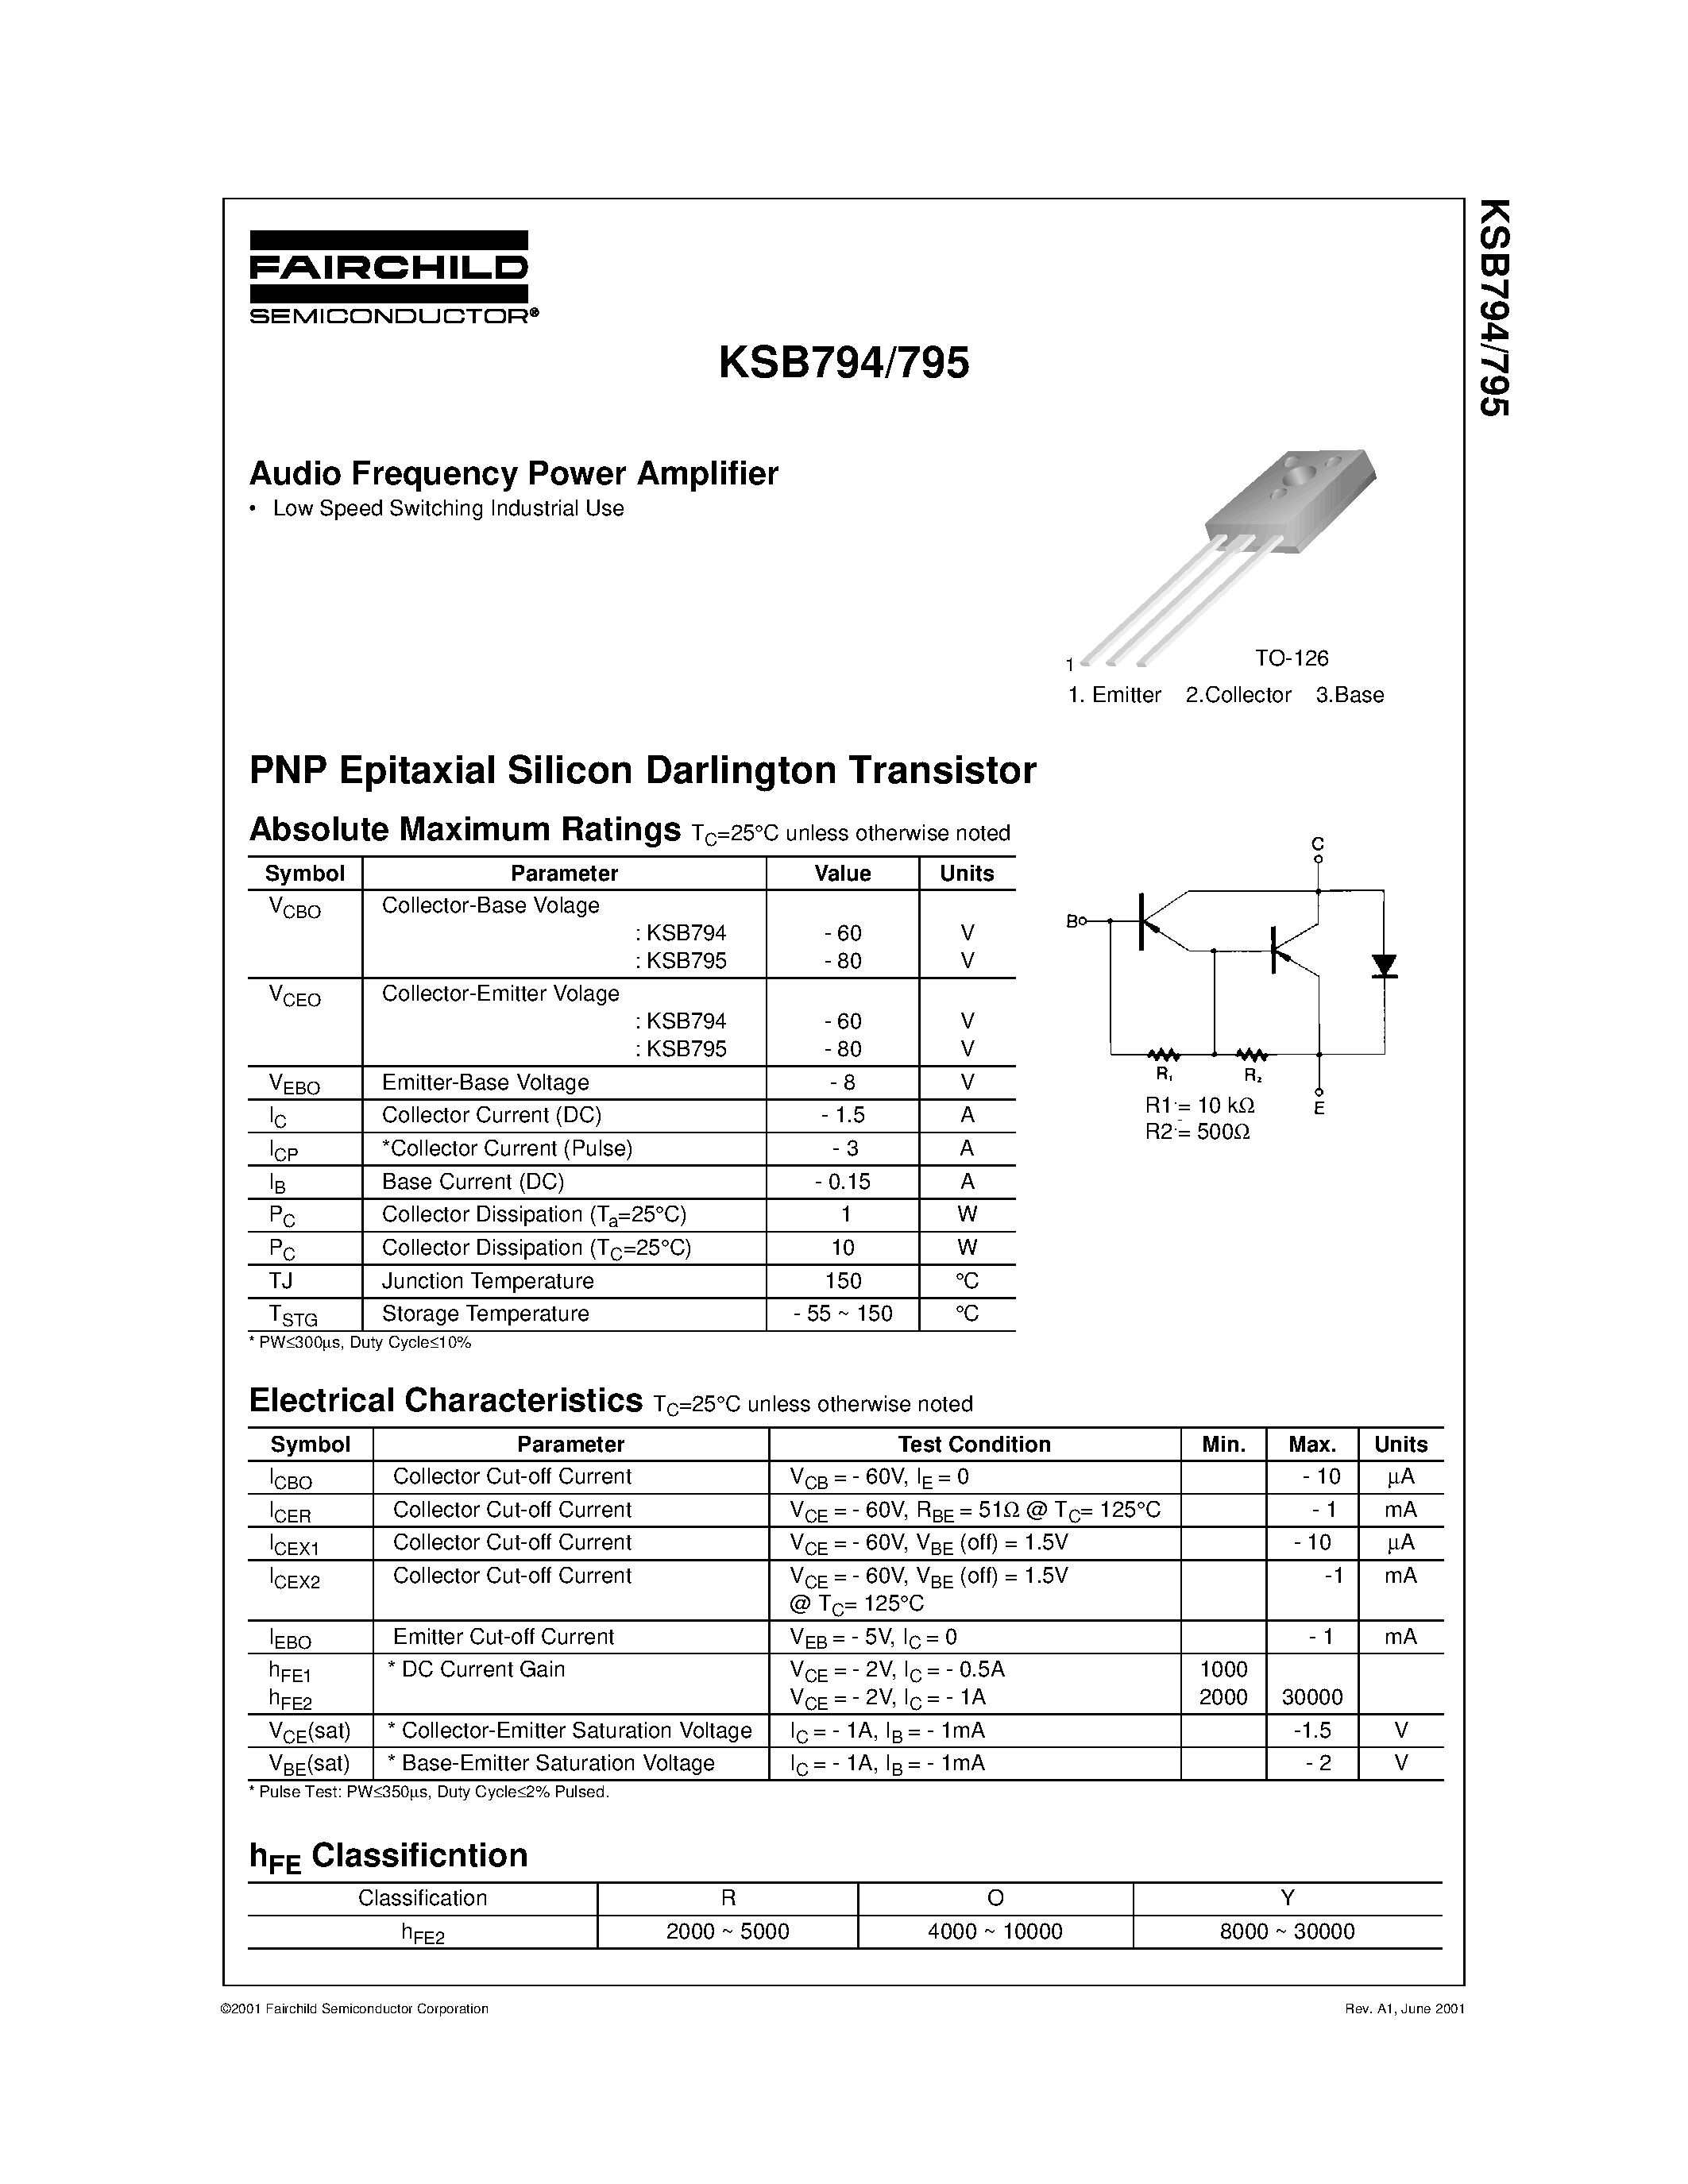 Datasheet KSB794 - Audio Frequency Power Amplifier page 1